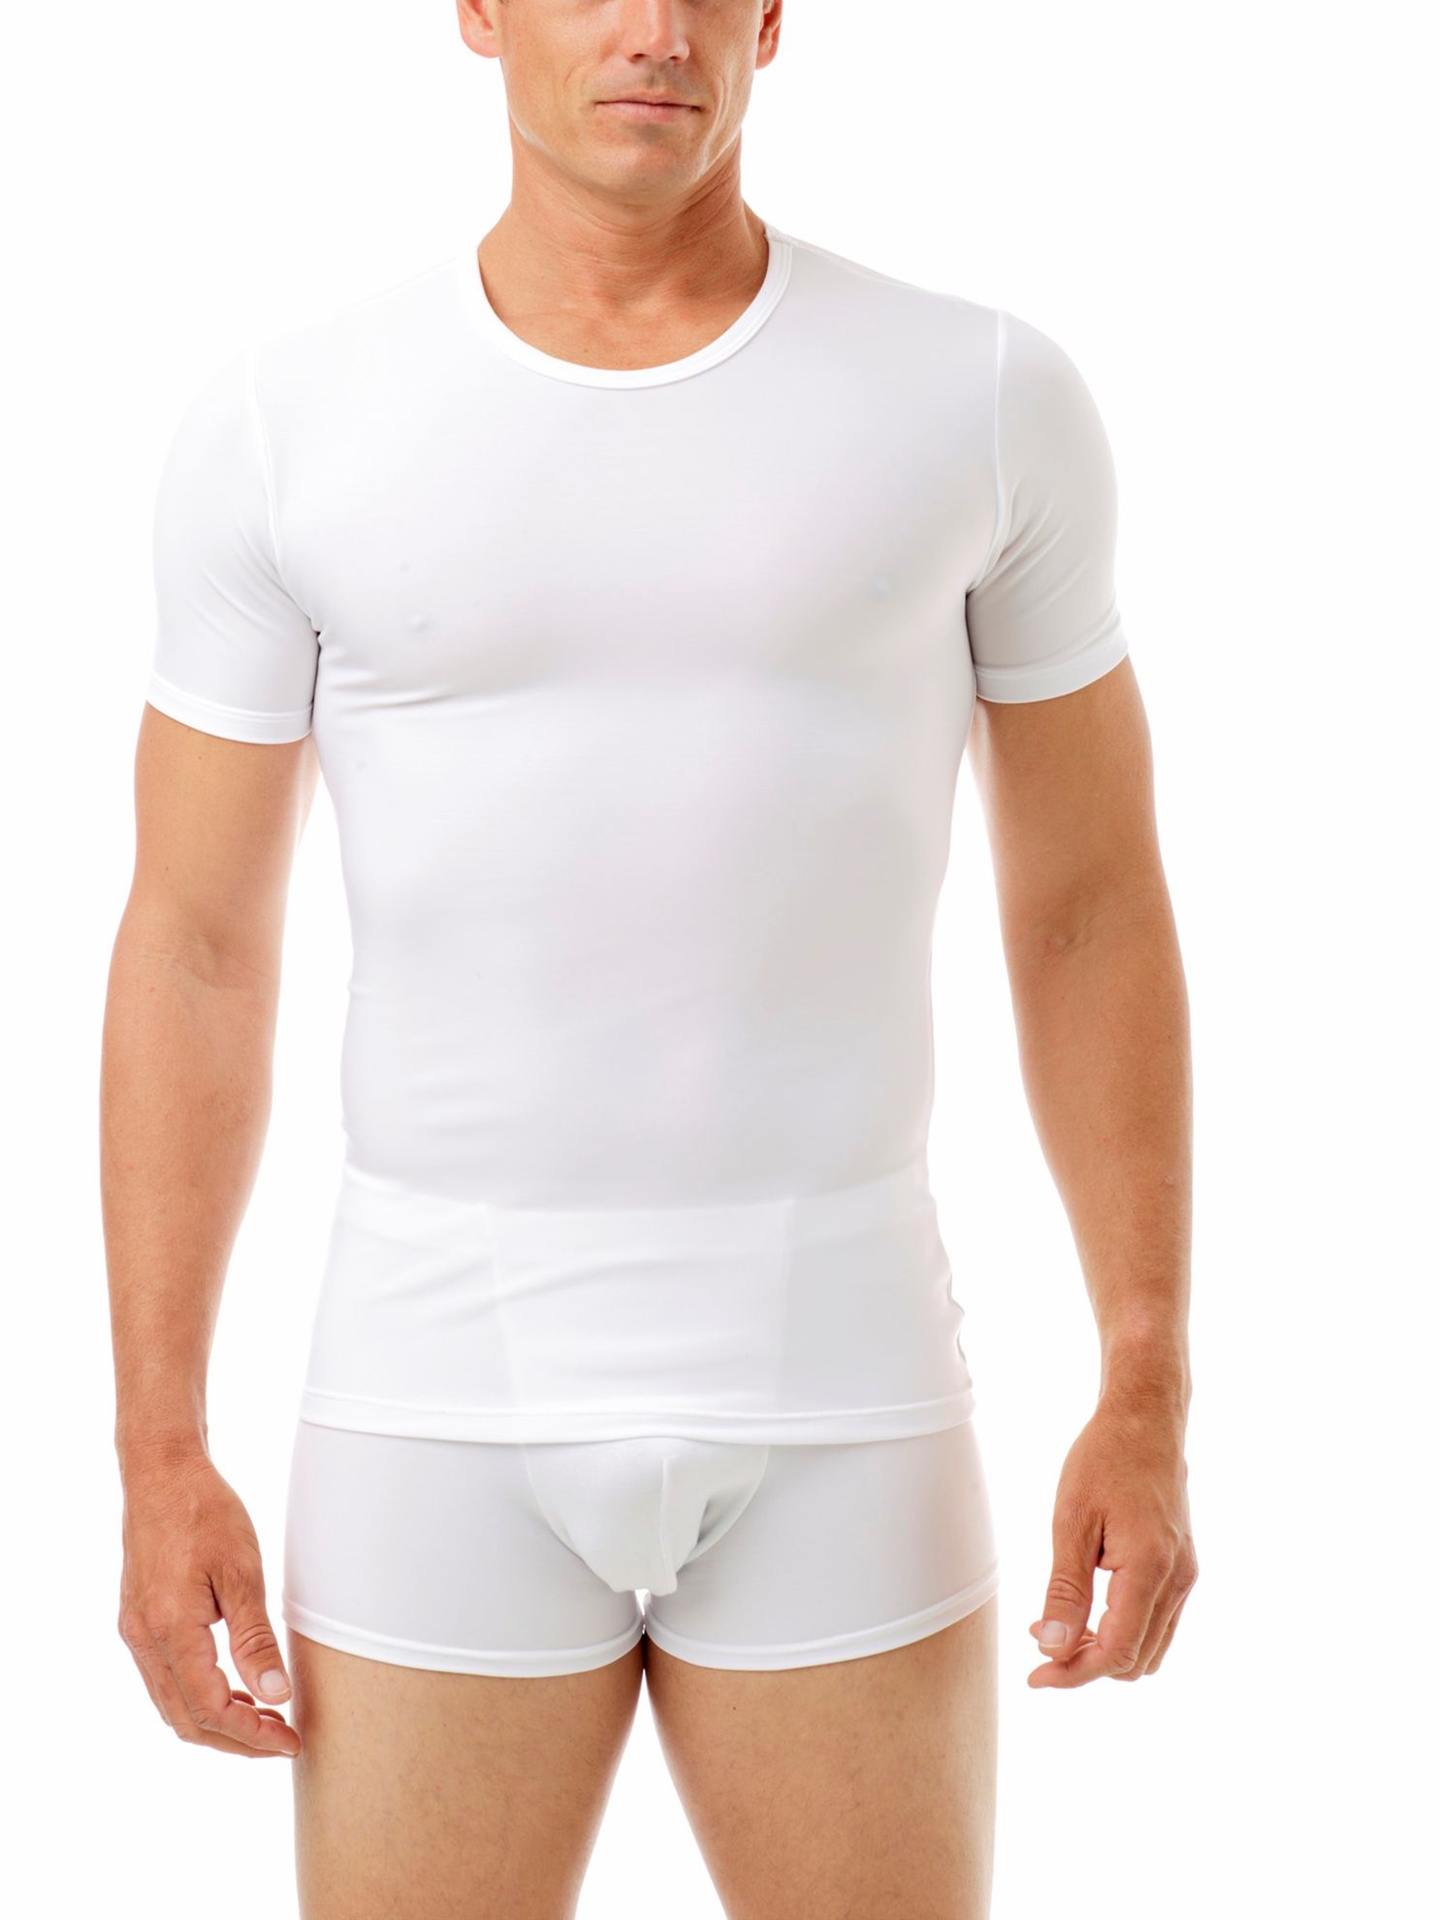 Microfiber Compression Crew Neck T-shirt with Short Sleeves. Men Compression  Shirts, Girdles, Chest Binders, Hernia Garments